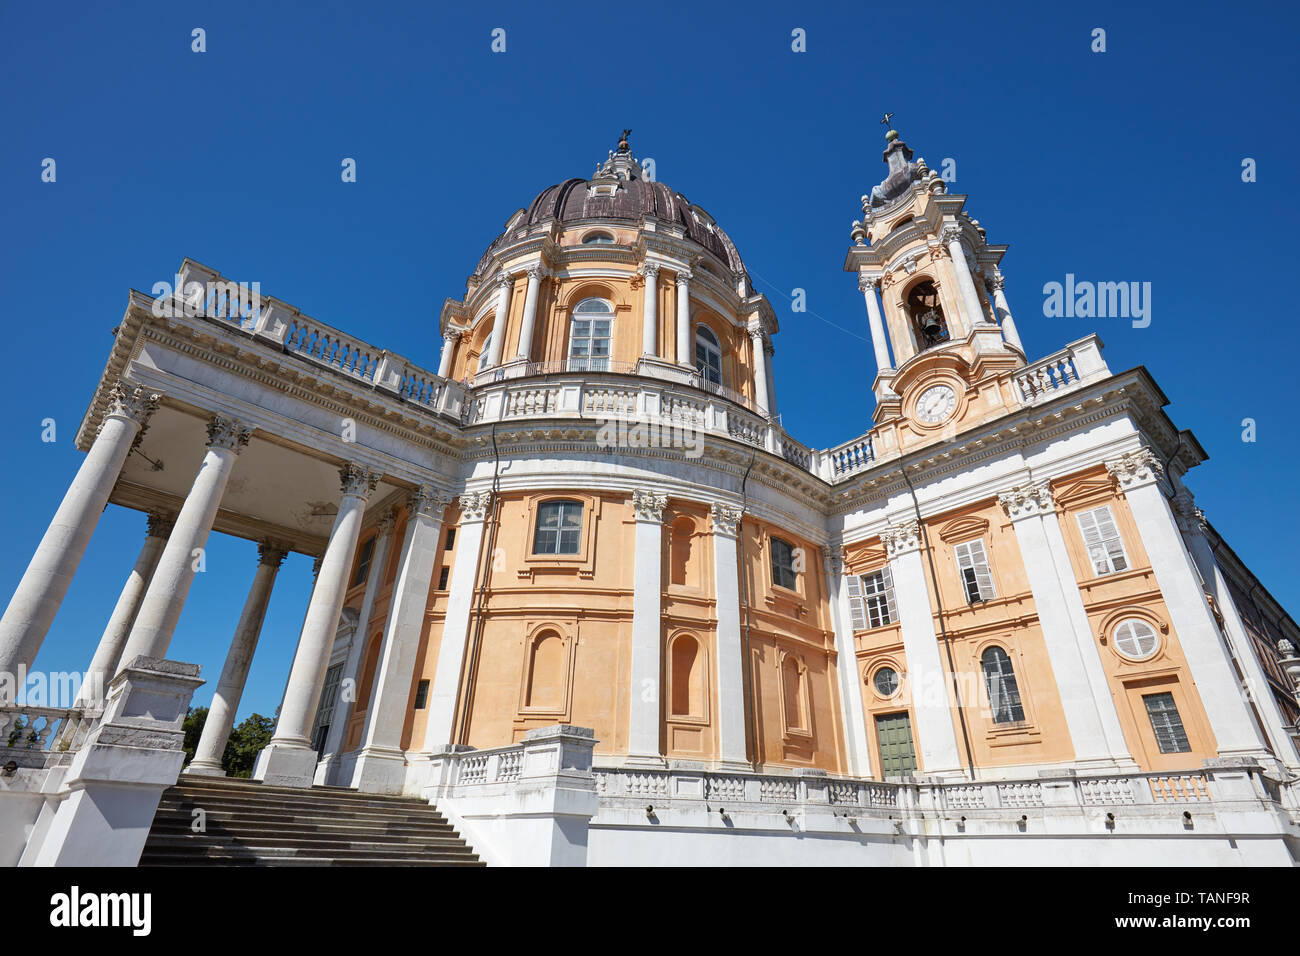 Superga basilica in a sunny summer day, clear blue sky in Turin, Italy Stock Photo